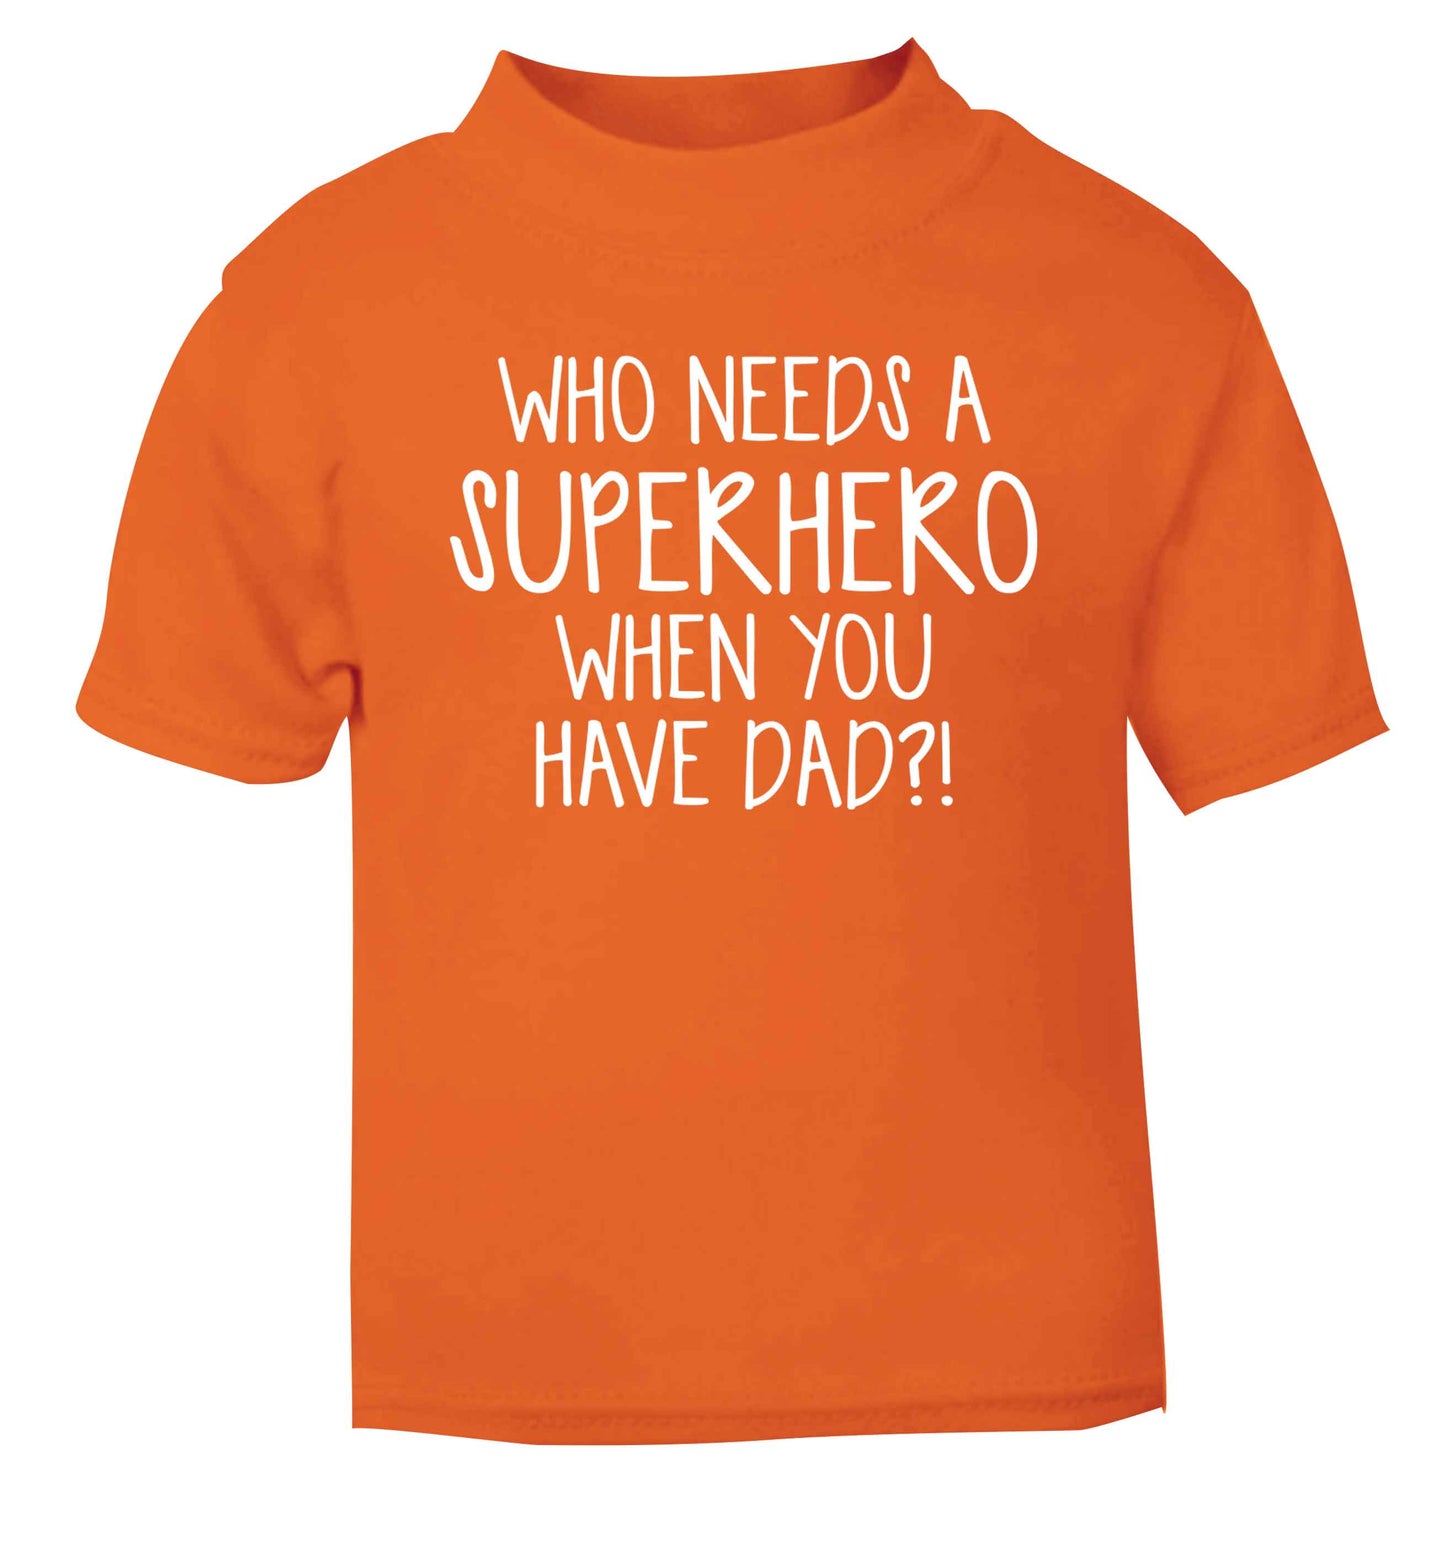 Who needs a superhero when you have dad! orange baby toddler Tshirt 2 Years